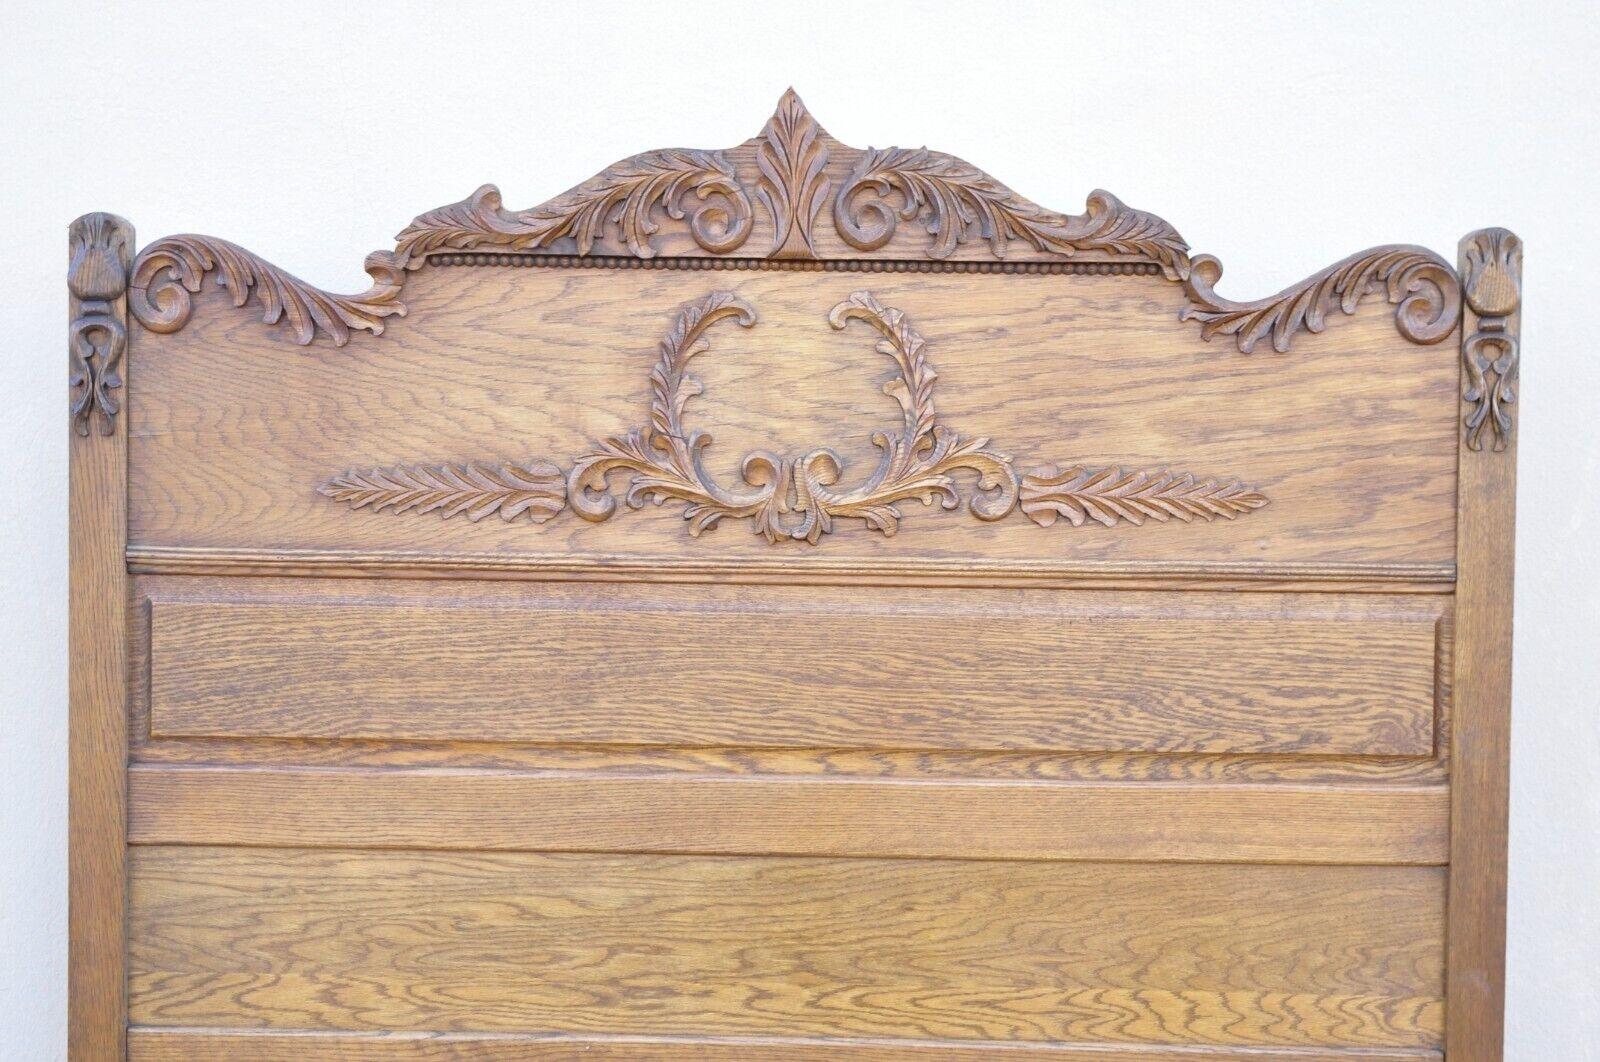 19th Century Antique Eastlake Victorian Oak Wood Tall Headboard Full Size Bed Frame For Sale